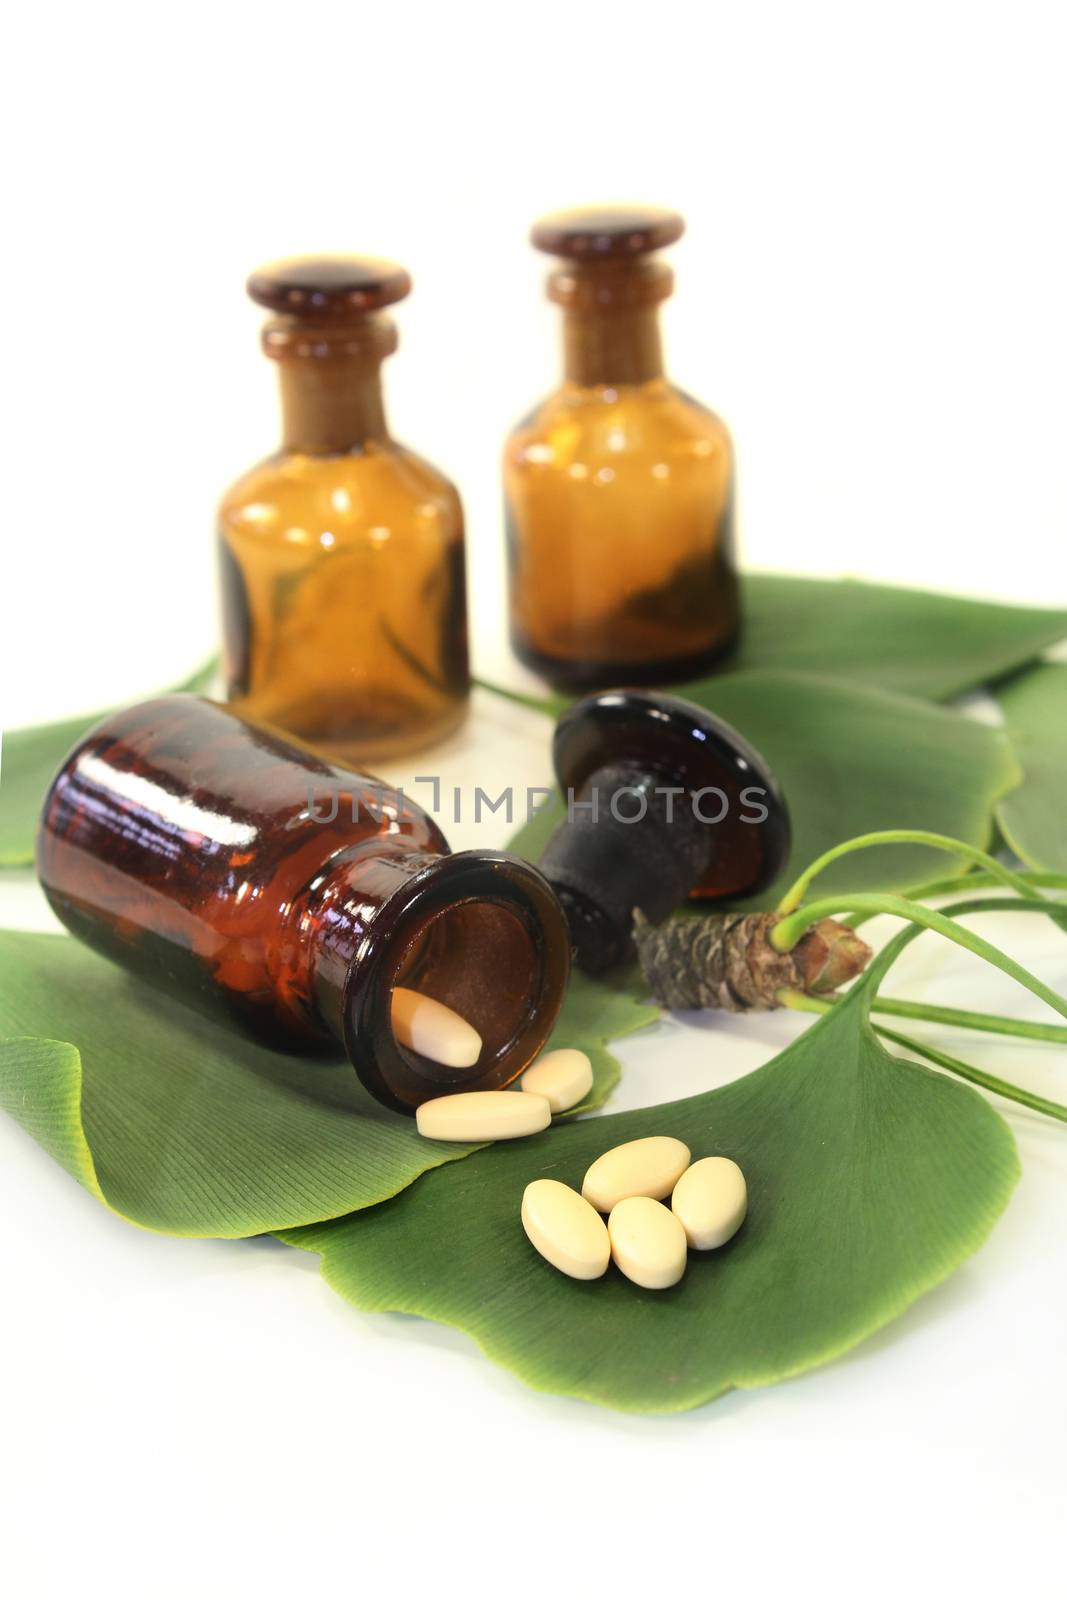 Ginkgo leaves with pharmacists bottle against white background